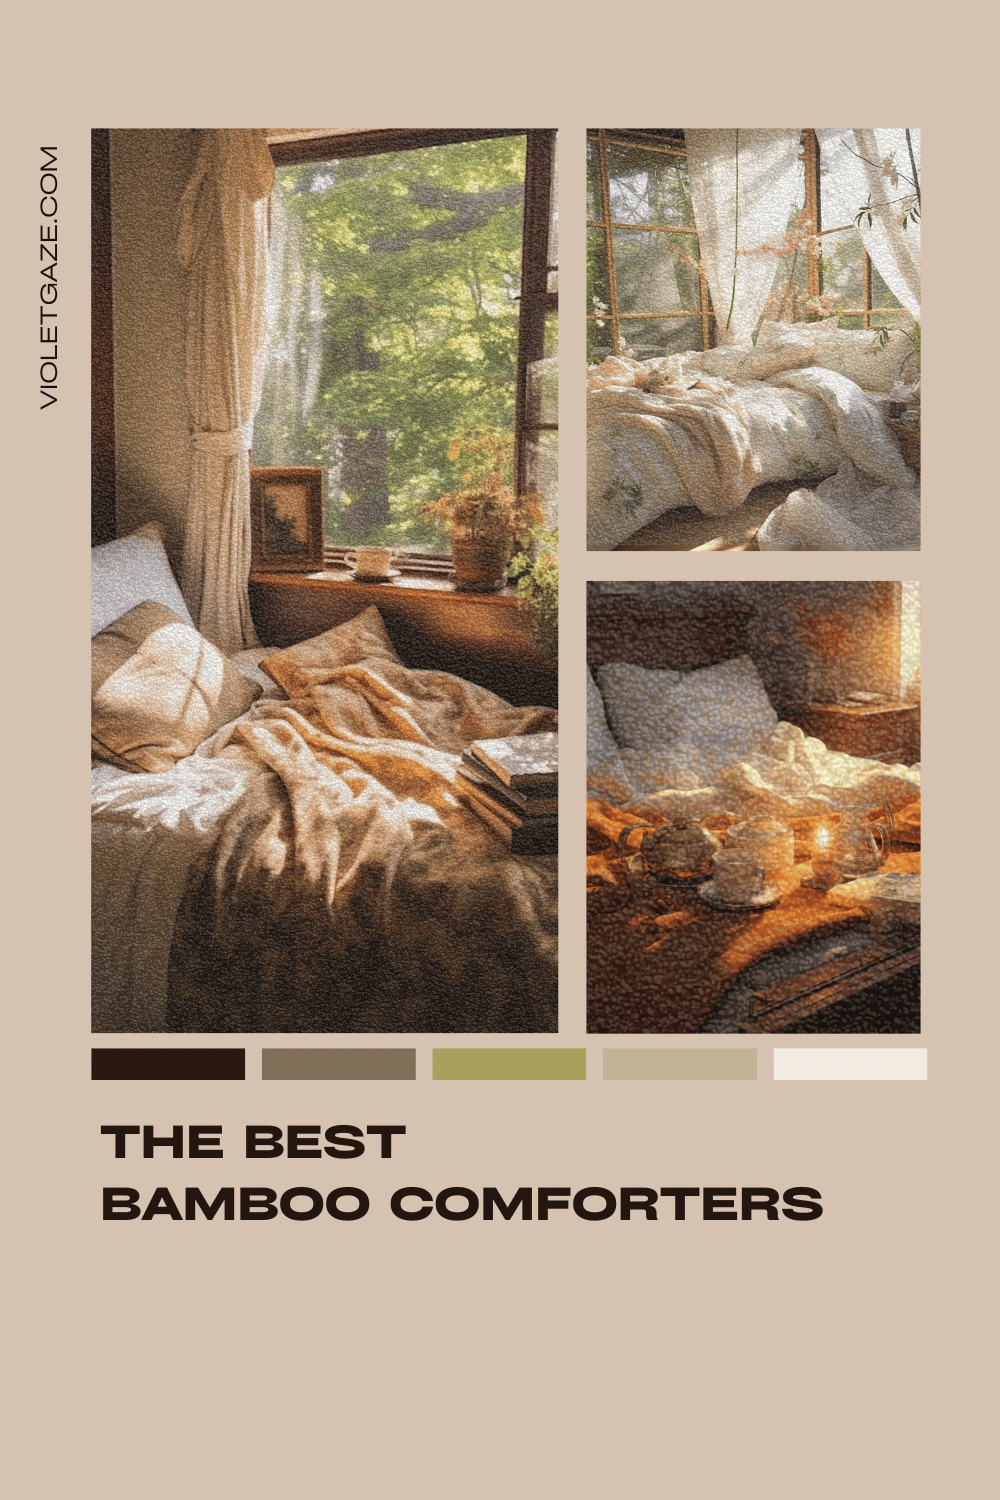 the best bamboo comforters